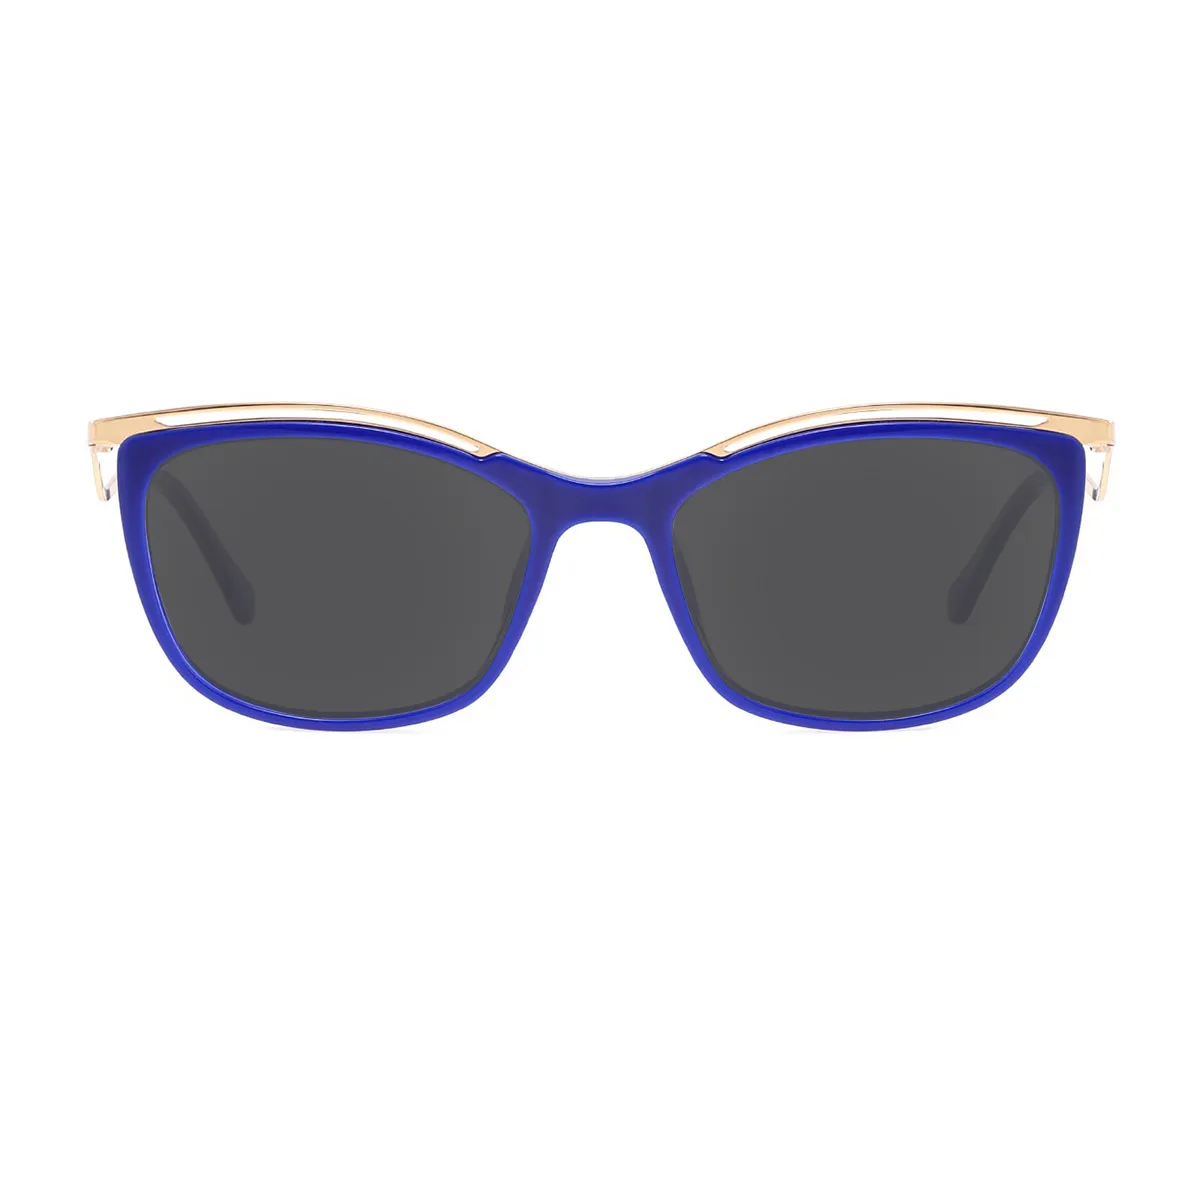 Luxury Designer Rectangle Triangle Sunglasses For Men And Women Retro  Frame, UV400 Protection, With Box From Qifei09, $15.85